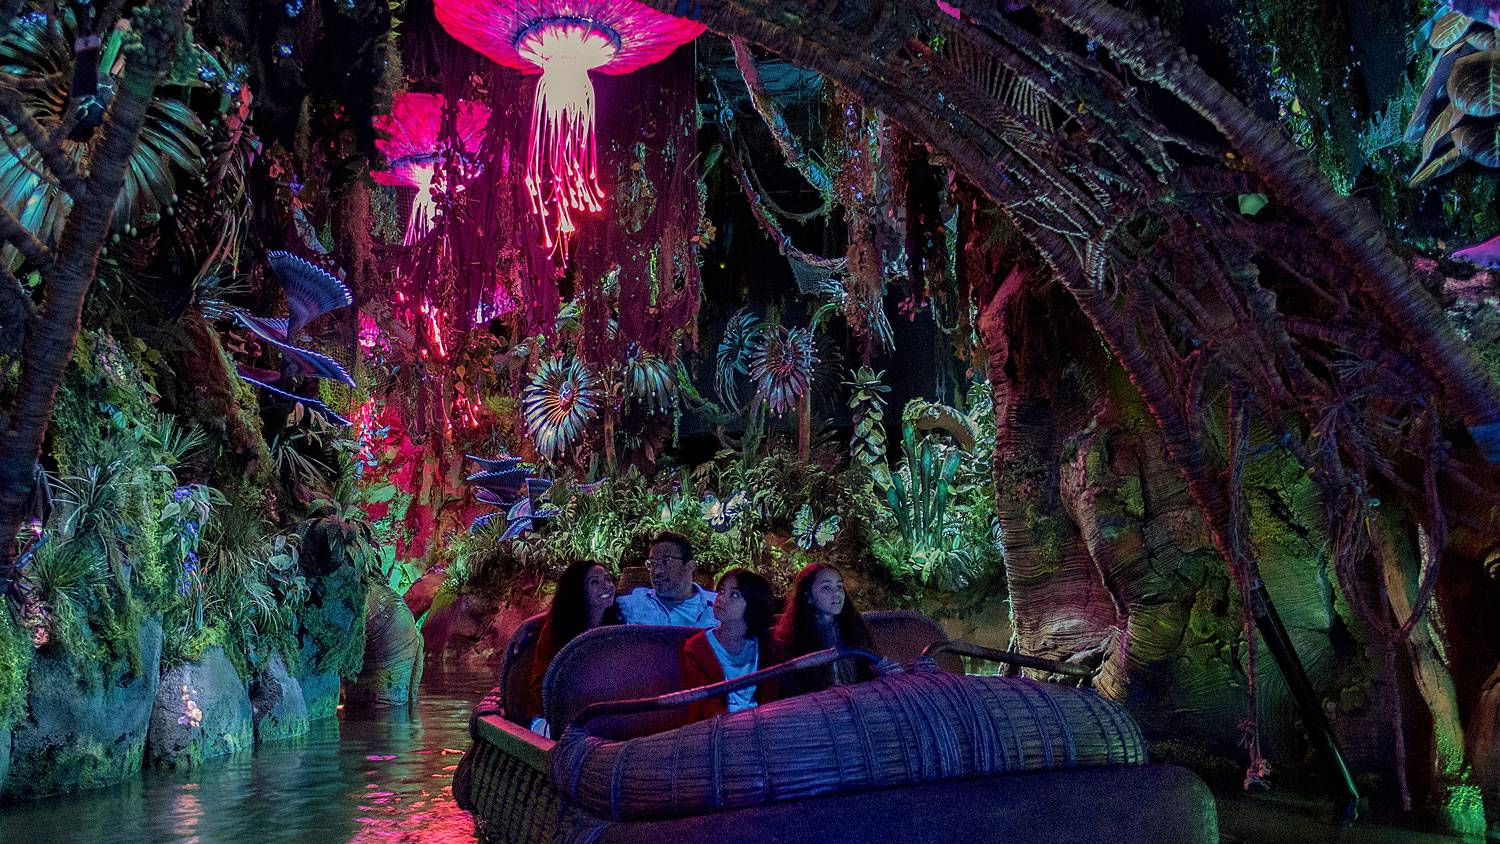 Annual Pass Previews of Pandora - The World of Avatar begin May 13